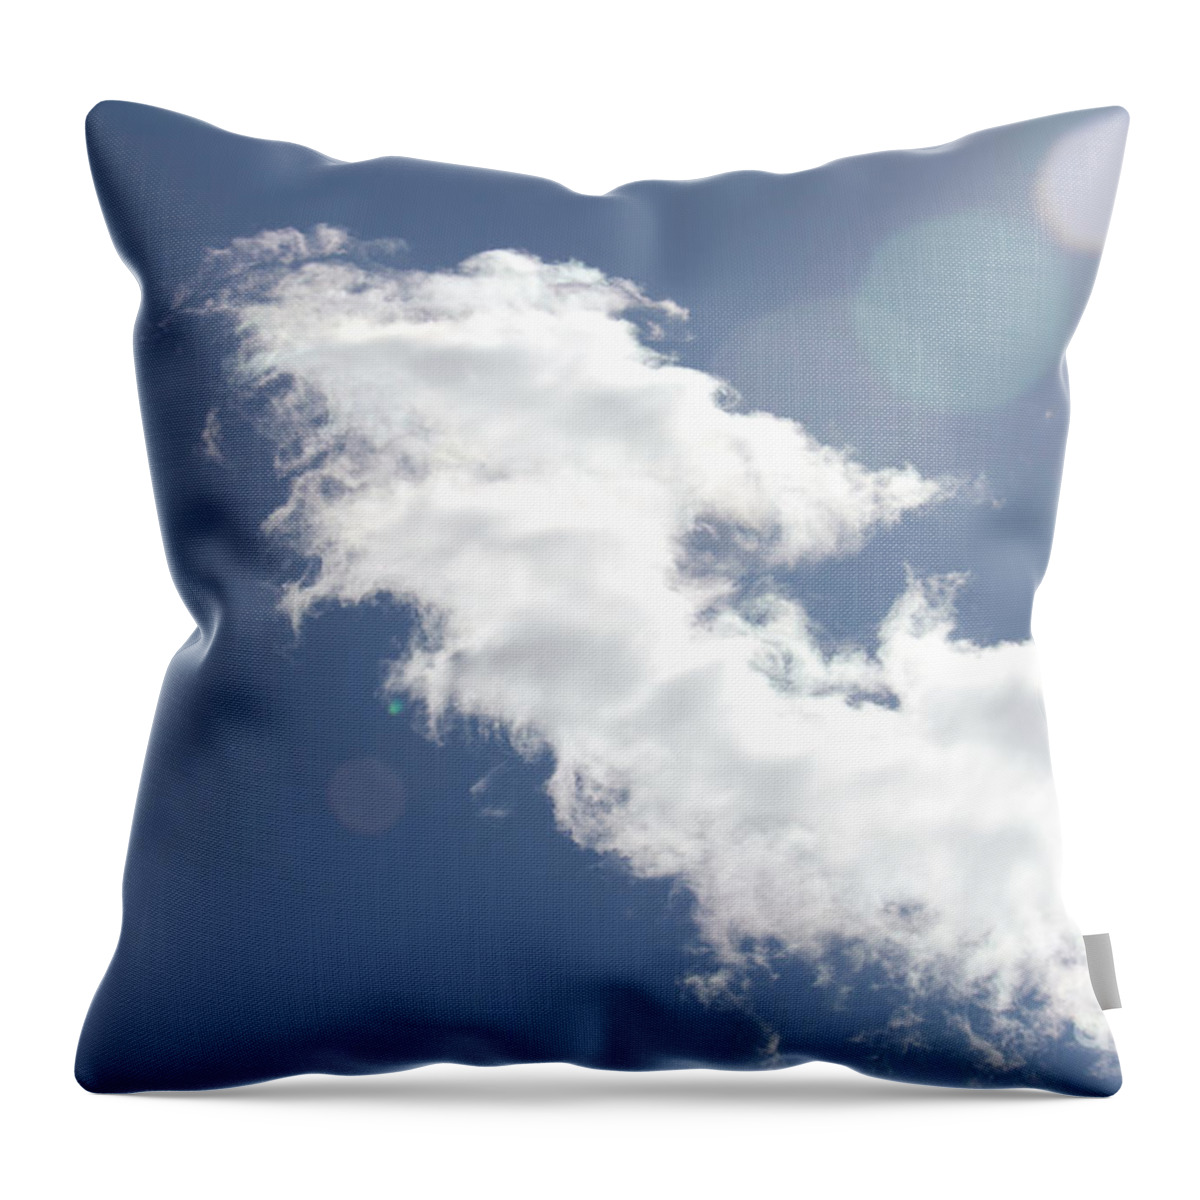 Light In Cloud Throw Pillow featuring the photograph Light in Cloud Flare by Donna L Munro